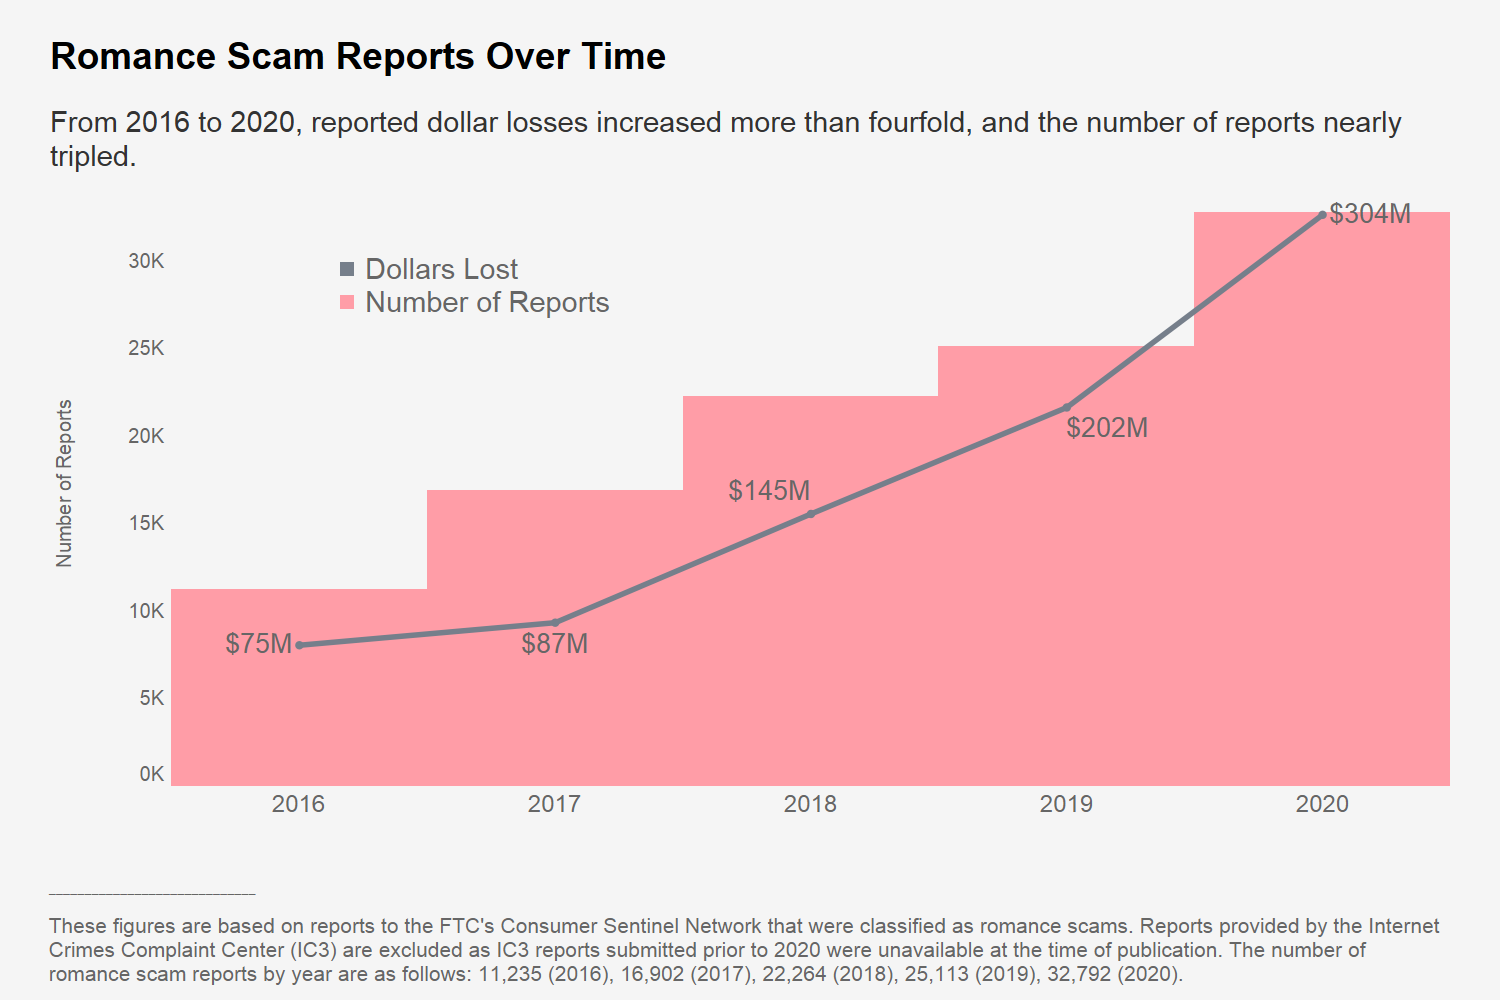 Graph of increase in romance scams over time - From 2016 to 2020, reported dollar losses increased more than fourfold and the number of reports more than tripled.